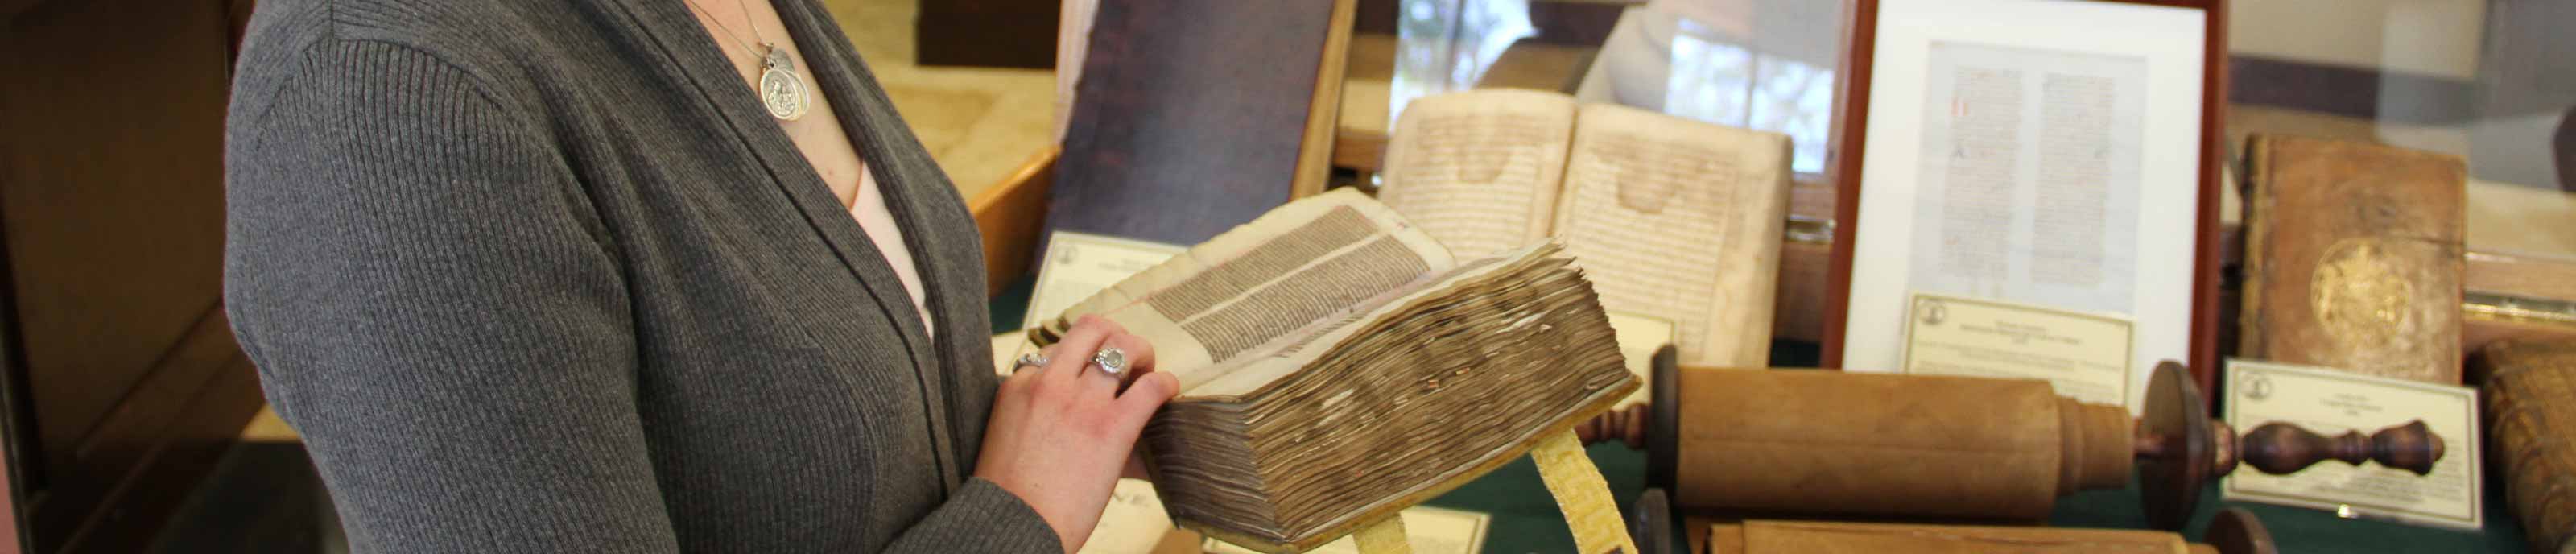 Student examining an old tome during the Wisdom of the Ages exhibit